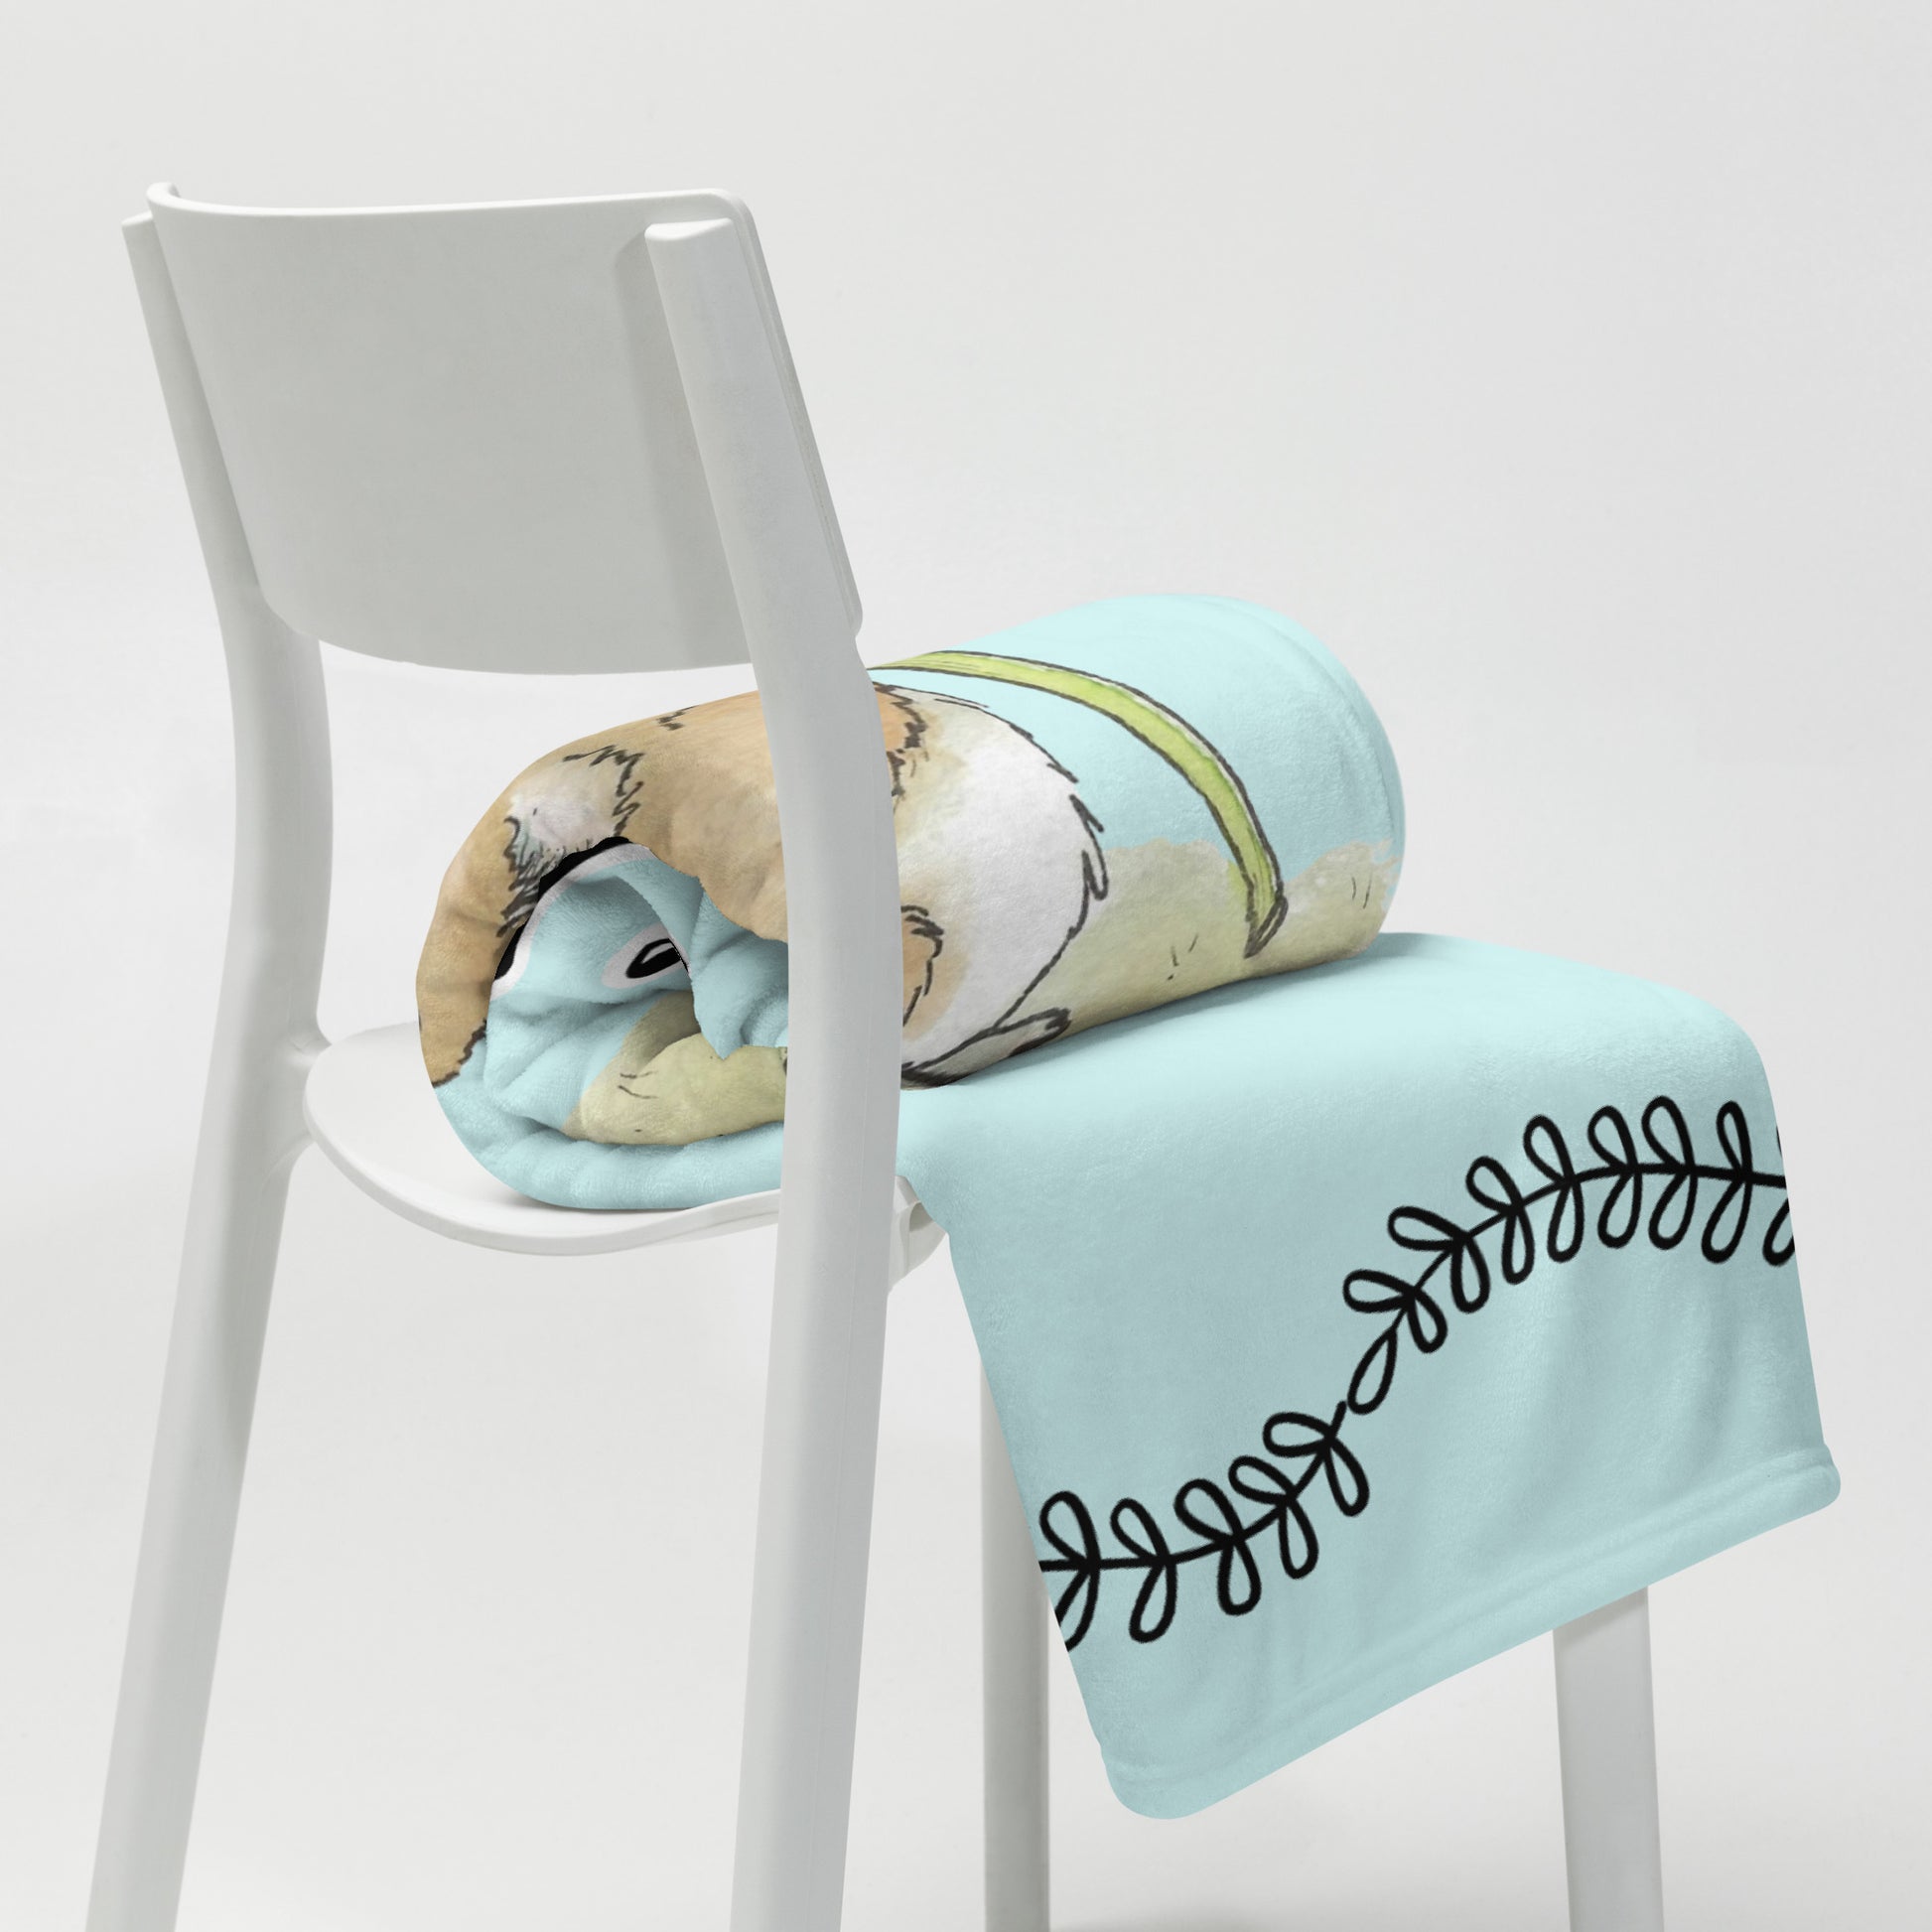 Original Dandelion Wish design of cute watercolor mouse blowing dandelion seeds on a light blue background. Black vine border on top and bottom. Make a Wish phrase below mouse graphic. 50 by 60 inch throw blanket rolled on white chair.